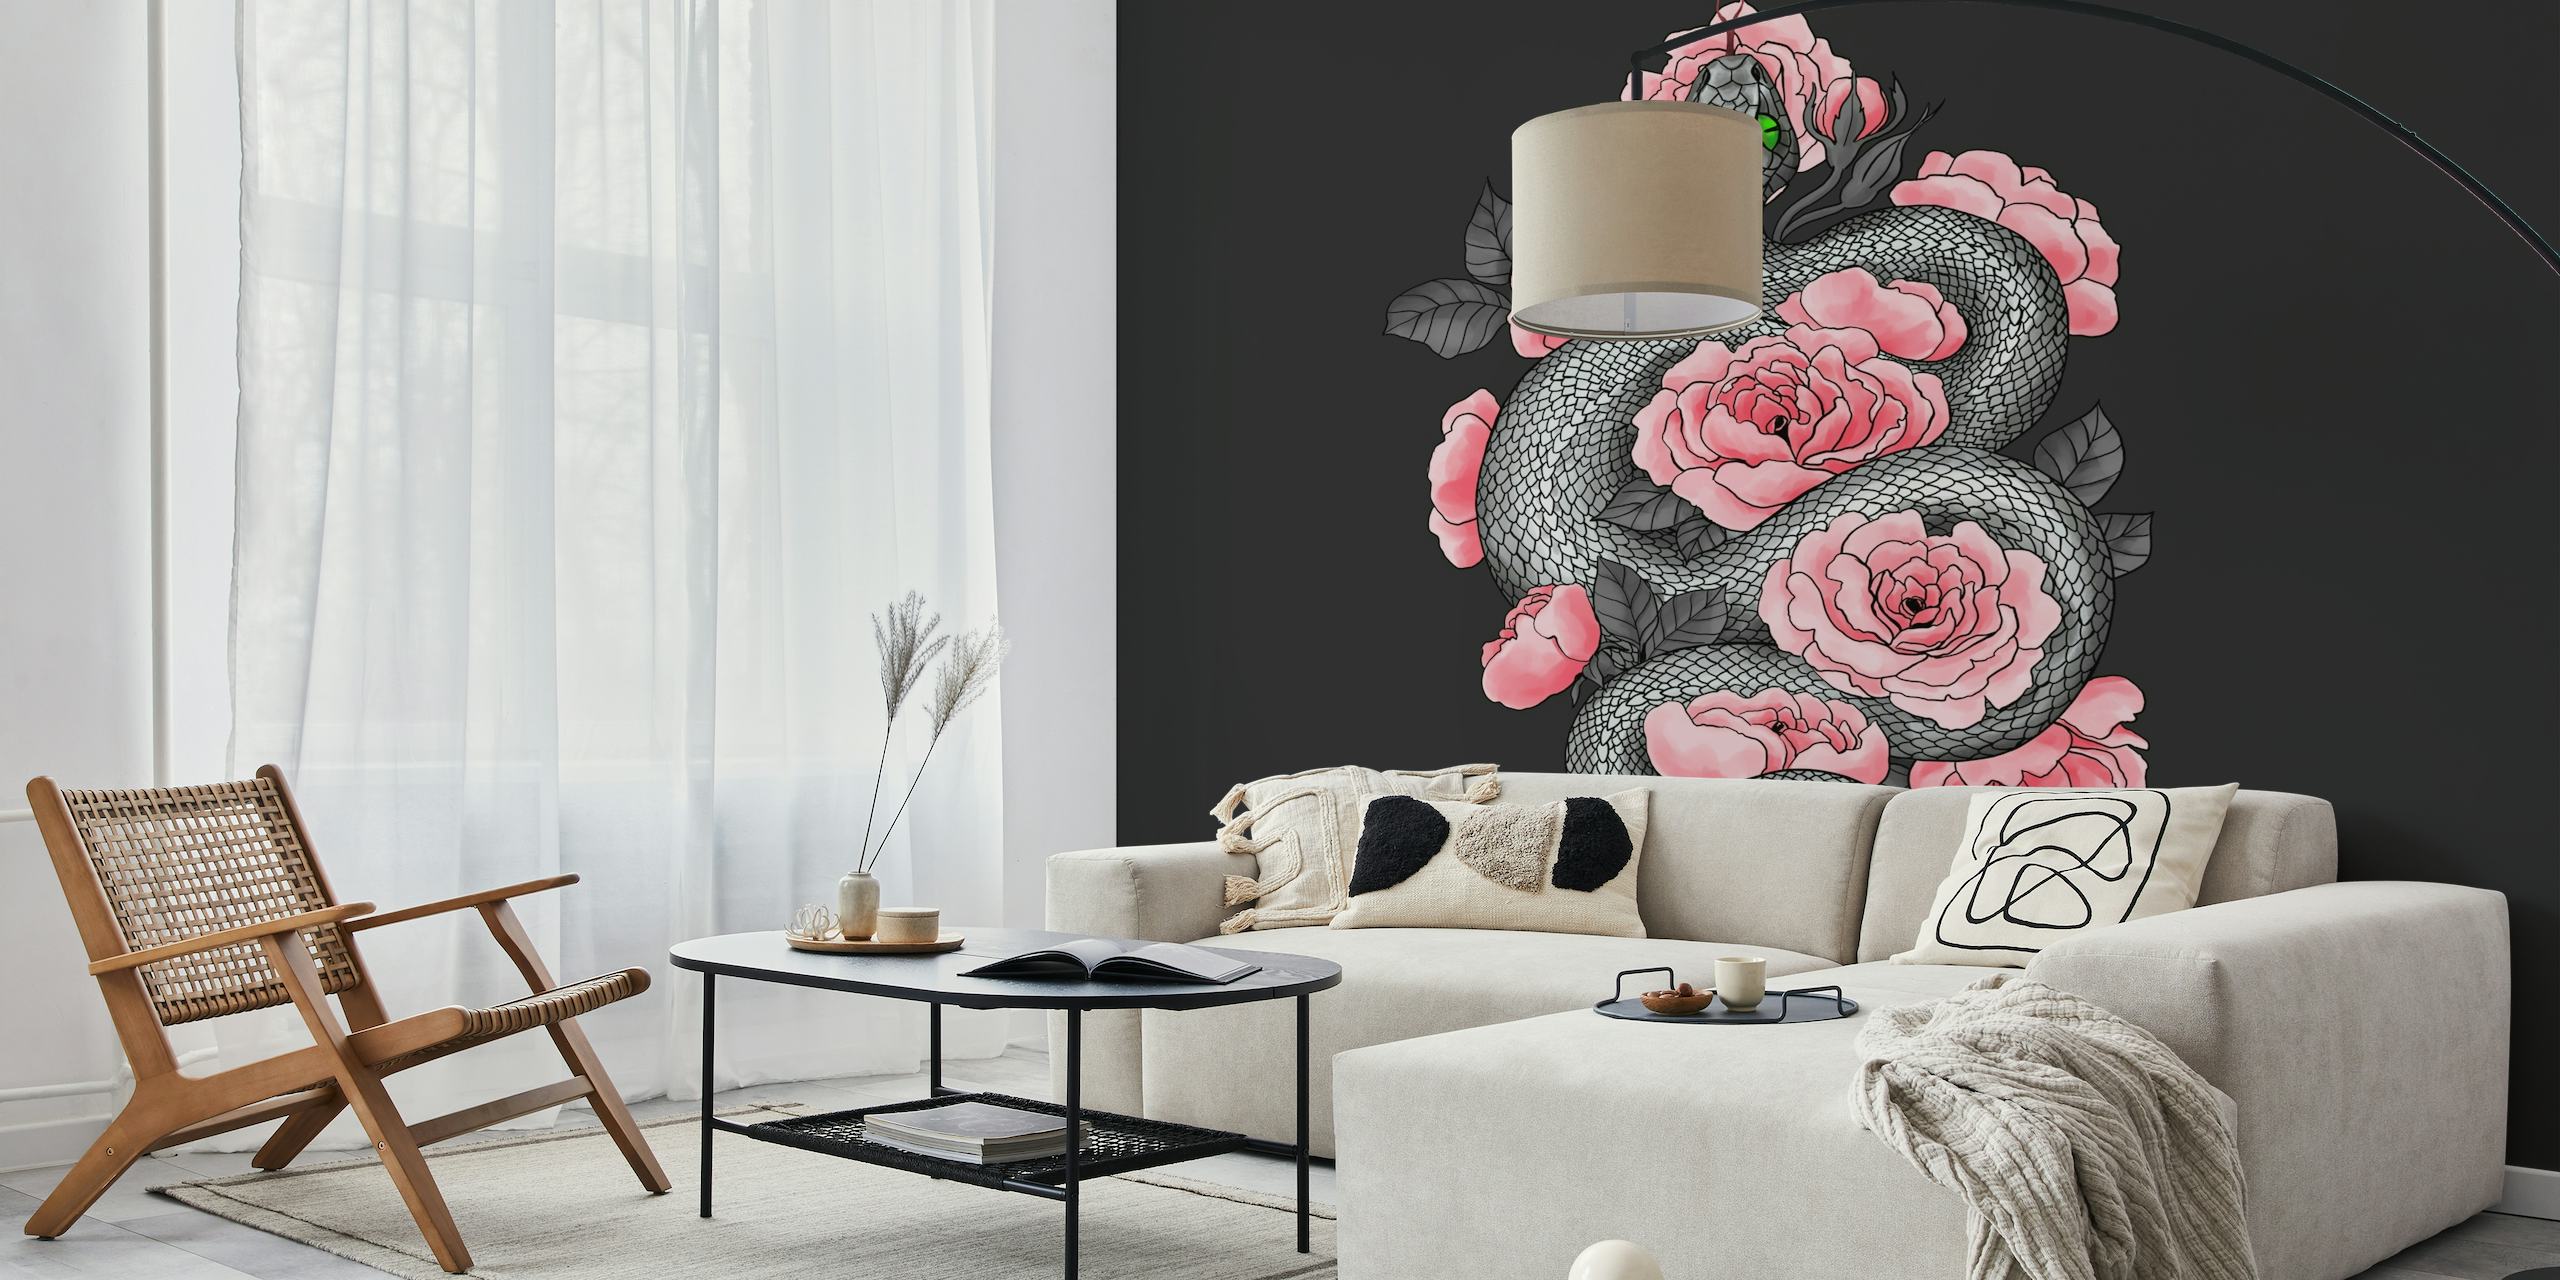 A wall mural featuring a snake among peach roses on a dark background